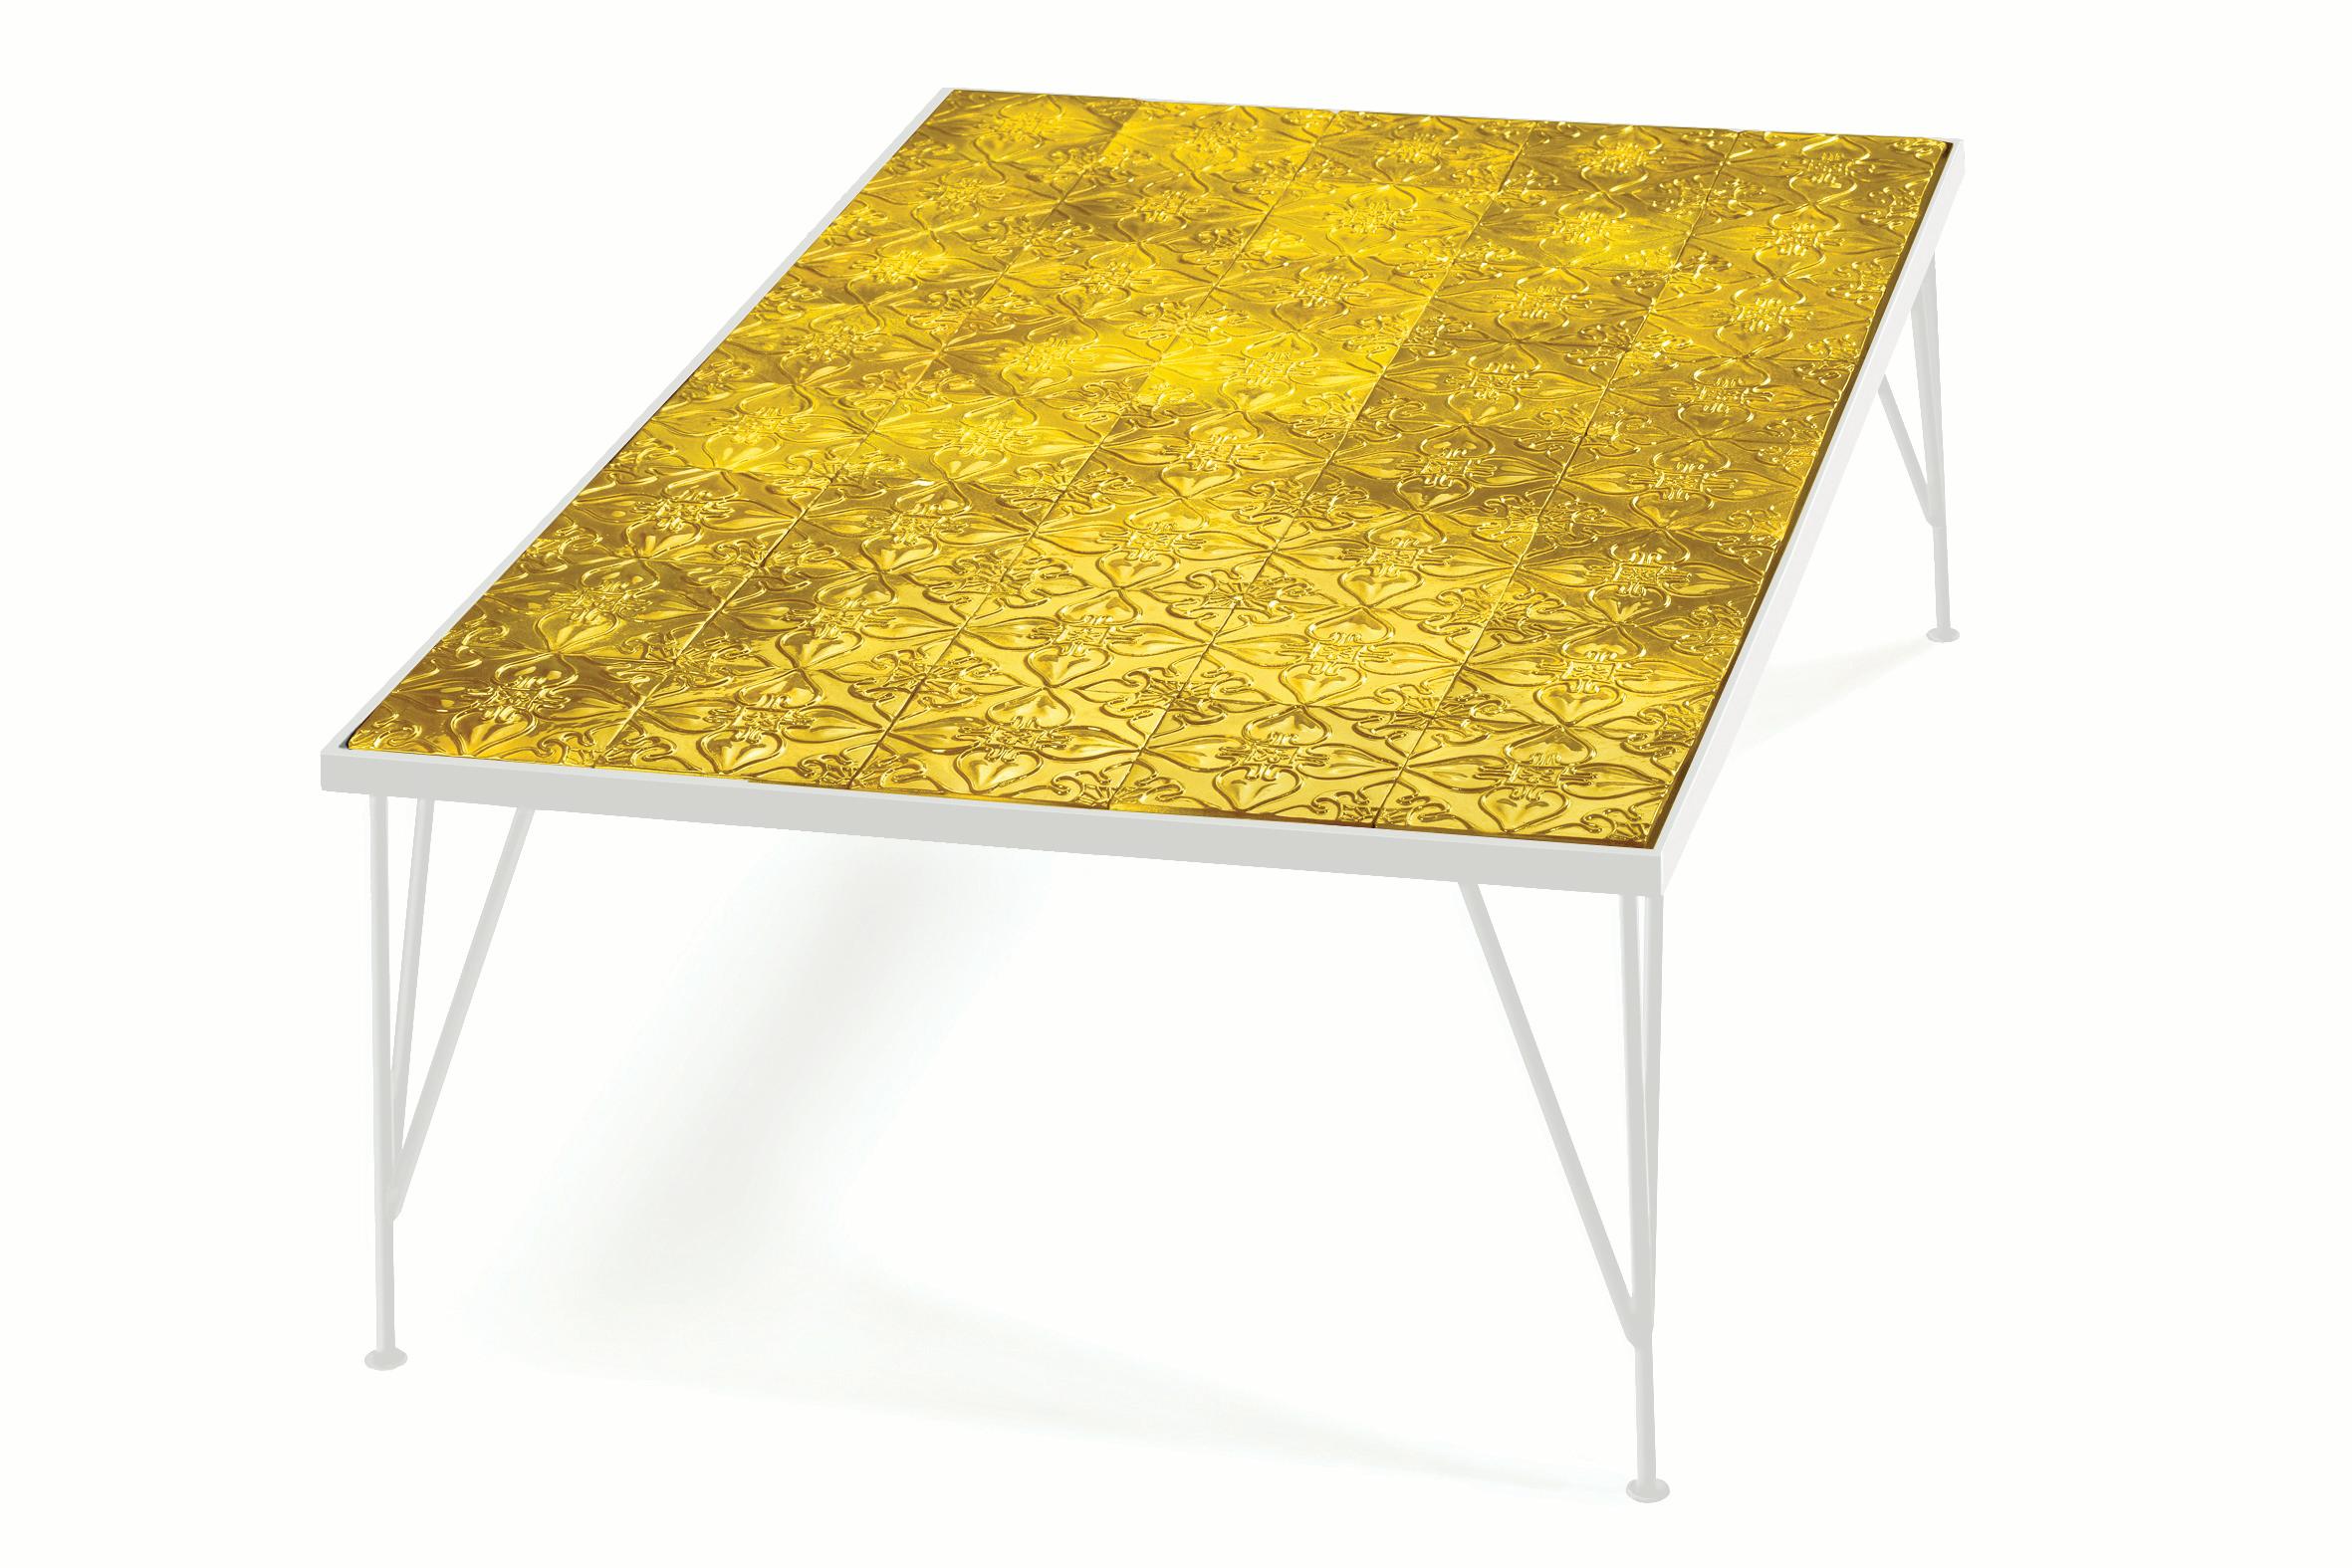 center table with tiles on top